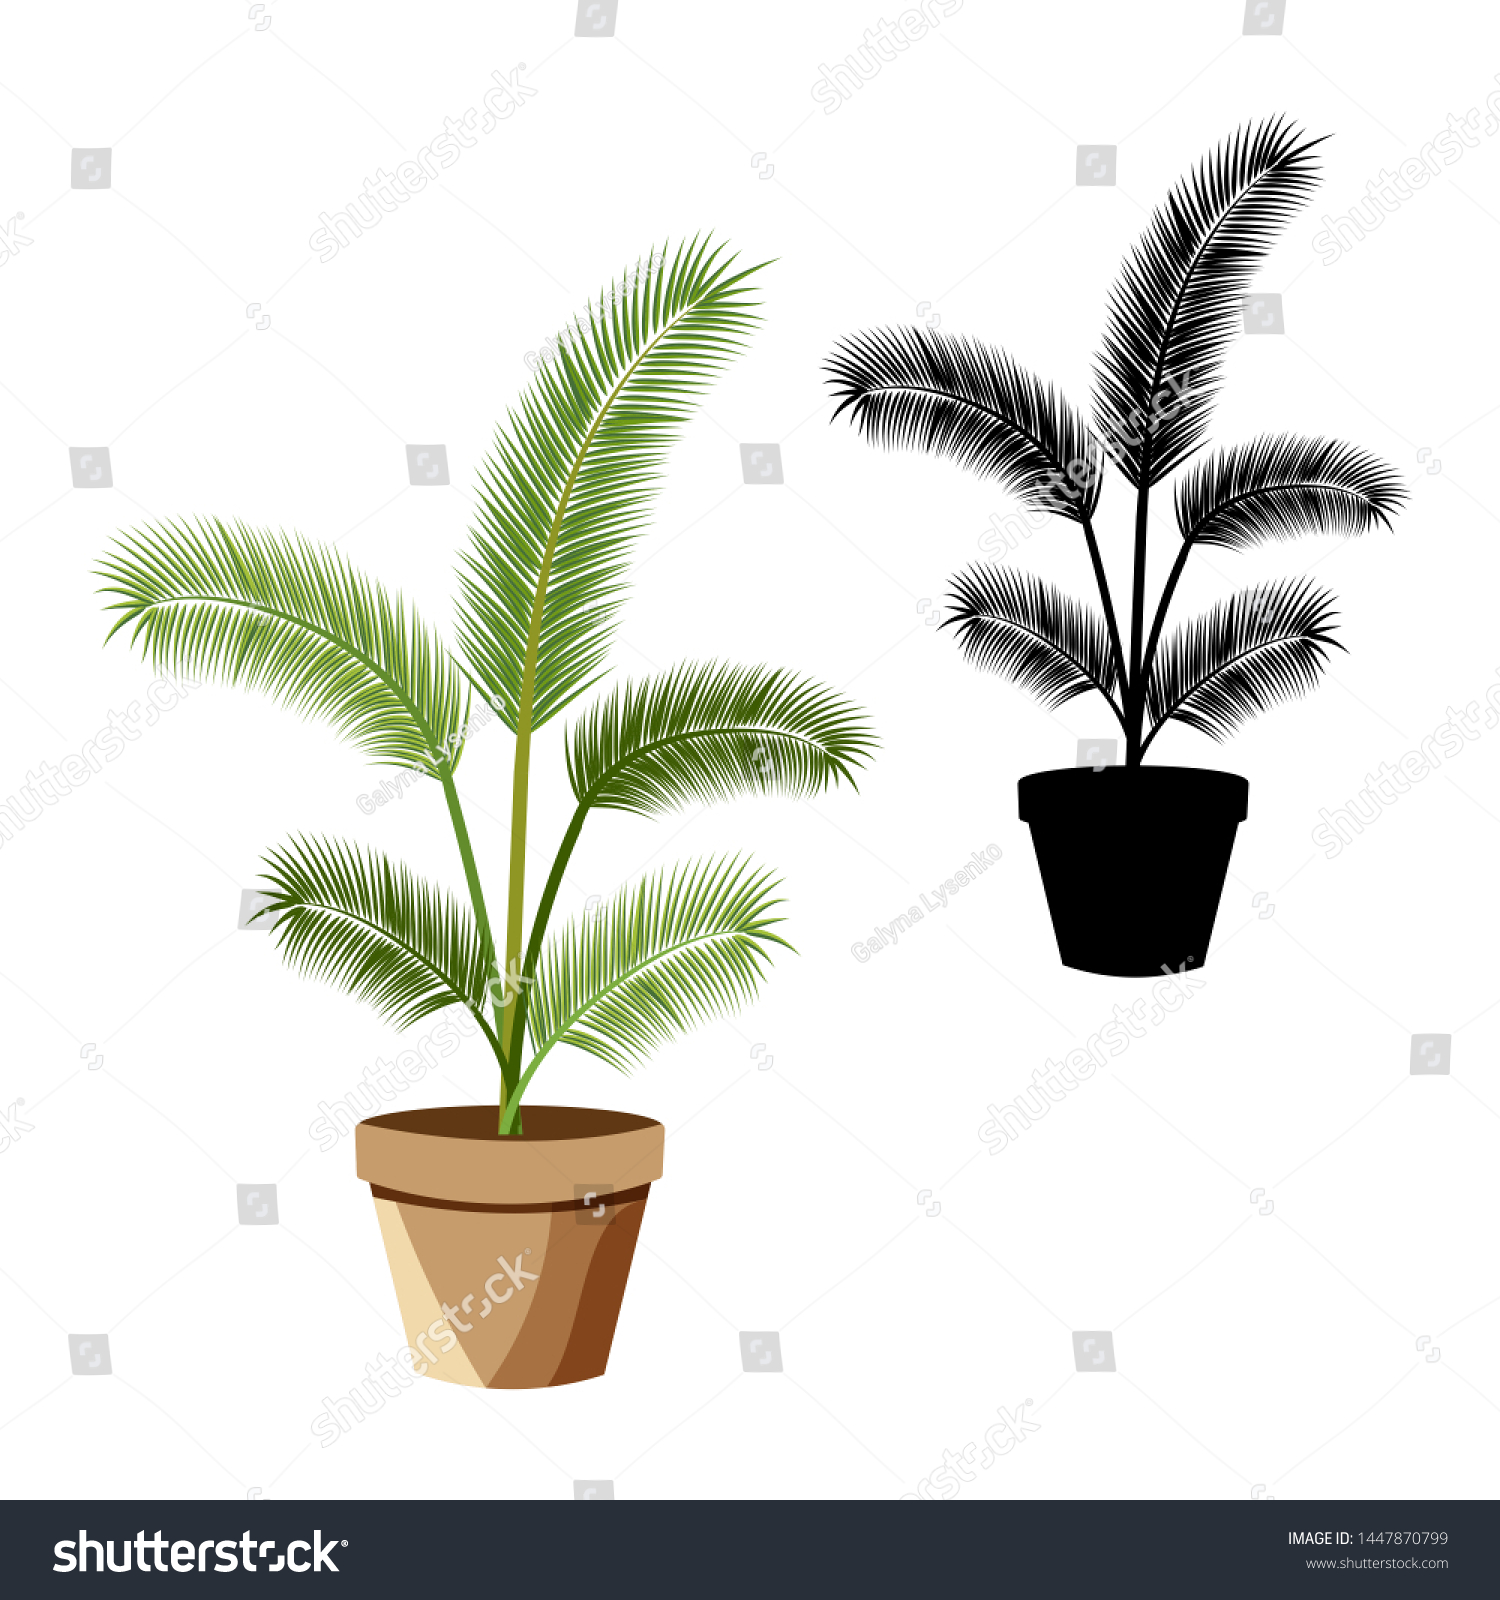 Set of vector detailed house plant for interior design and decoration.Tropical plant for interior decor of home or office.Color and monochrome  drawings. #1447870799